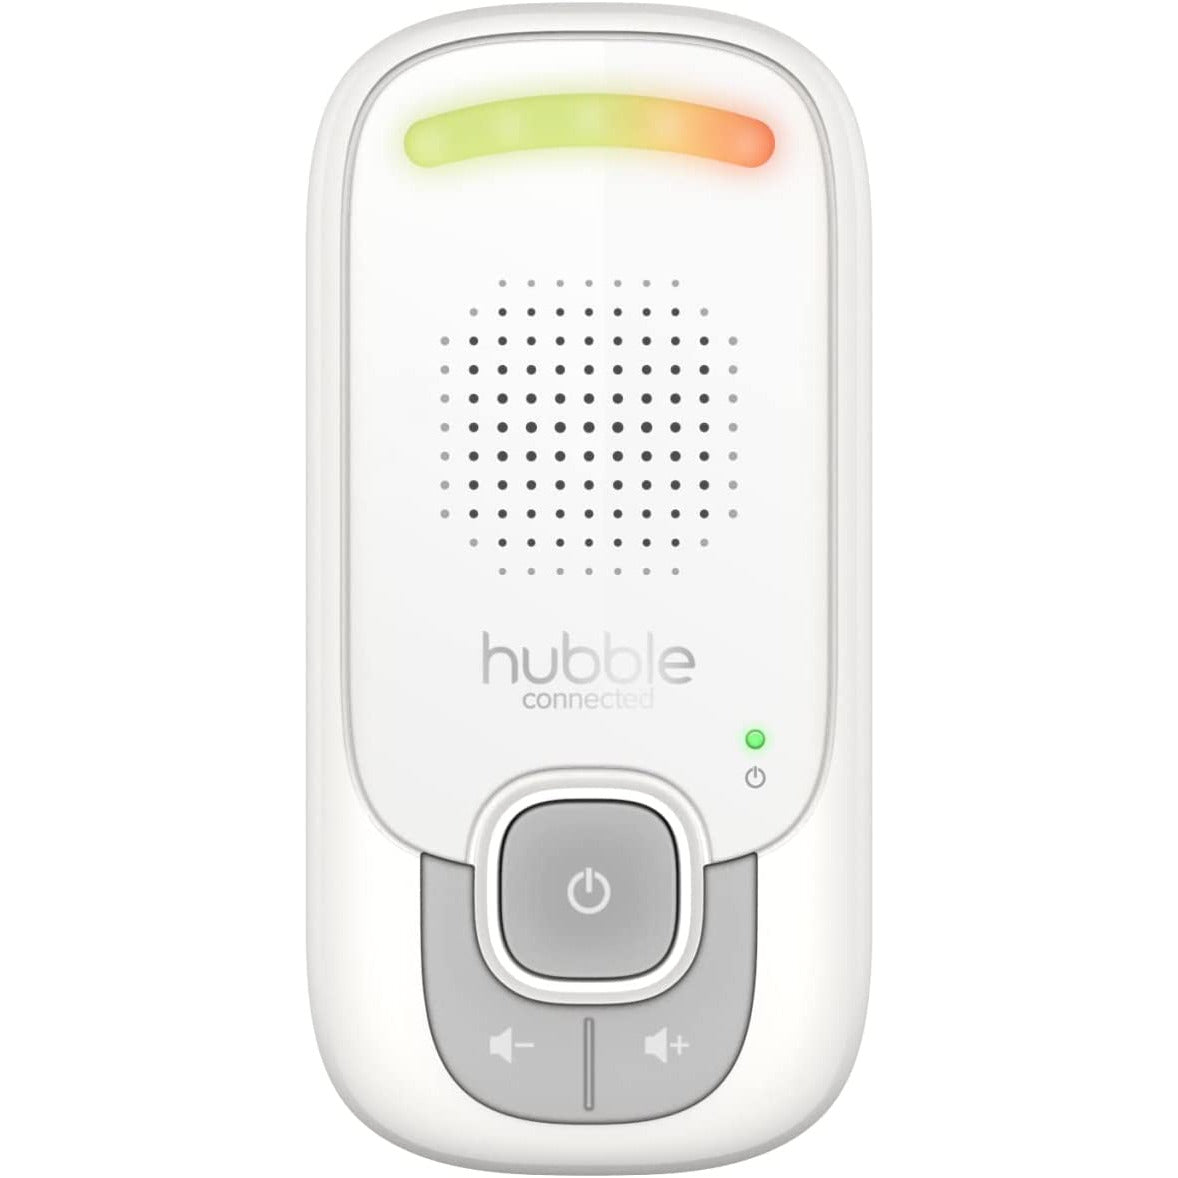 Hubble Smart Listen Audio Baby Monitor - White | 5012786050099 from Hubble - DID Electrical